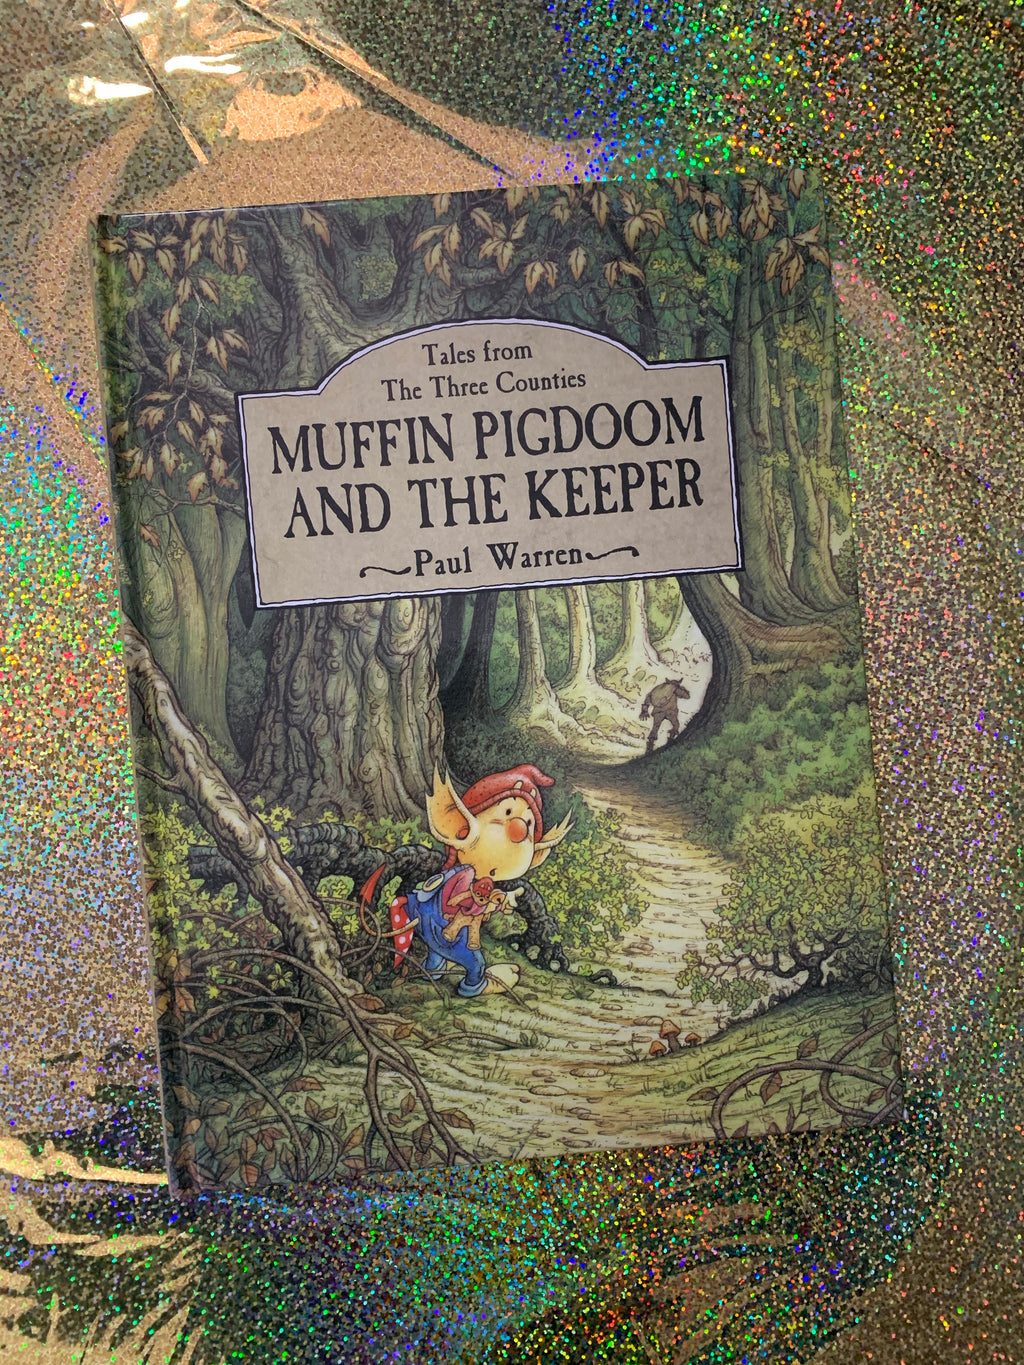 Tales from the Three Counties: Muffin Pigdoom and the Keeper- By Paul Warren